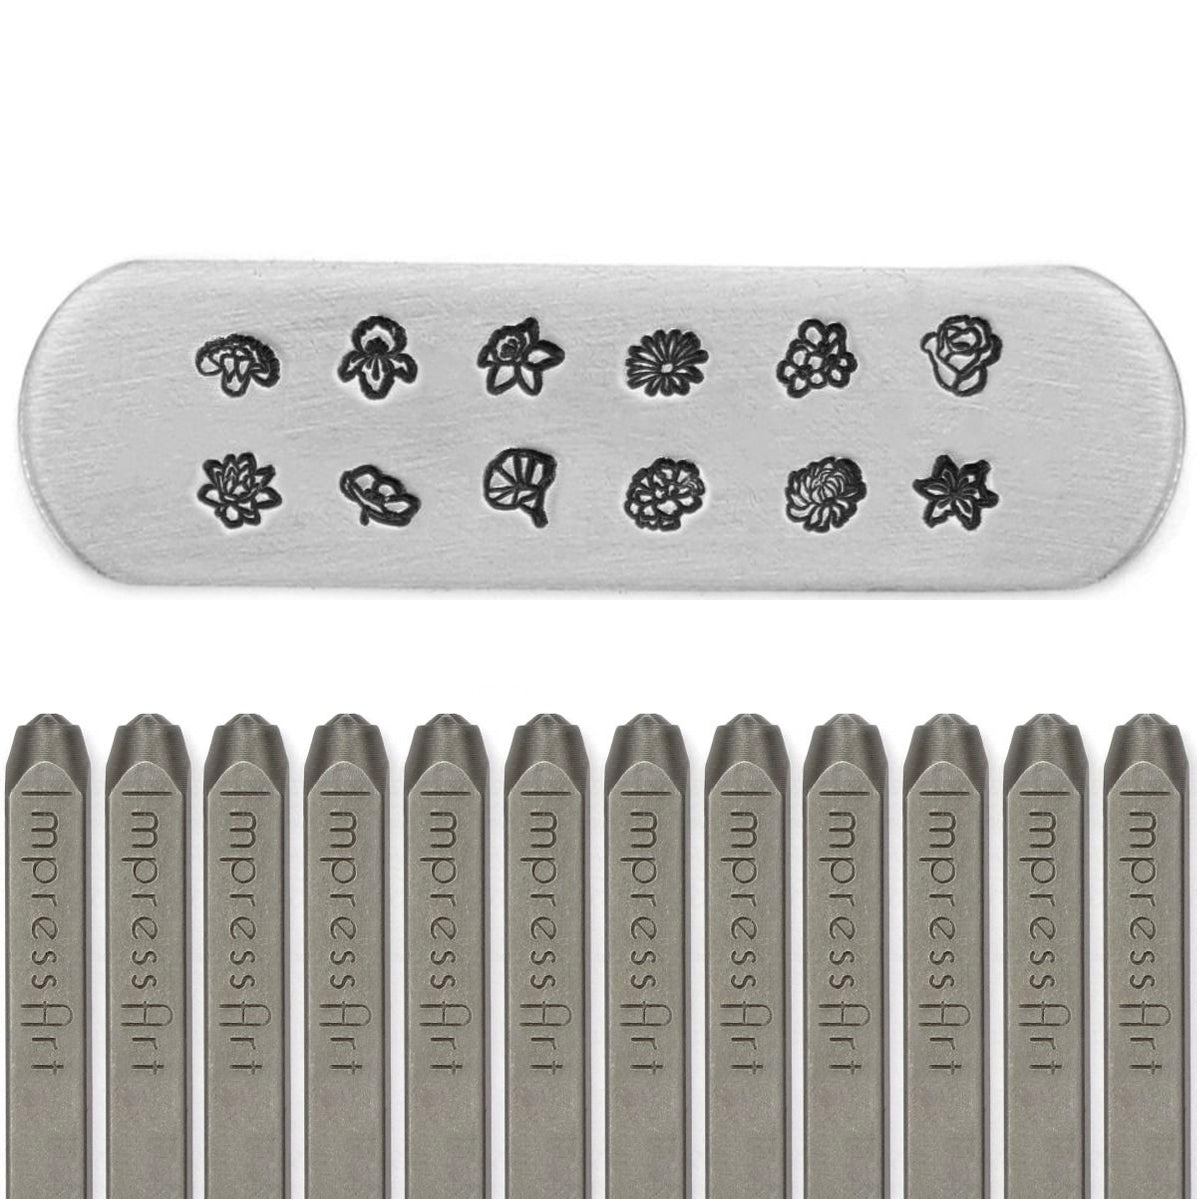 ImpressArt Melody Typeface Numbers 0-9 Metal Stamps Set, 3mm